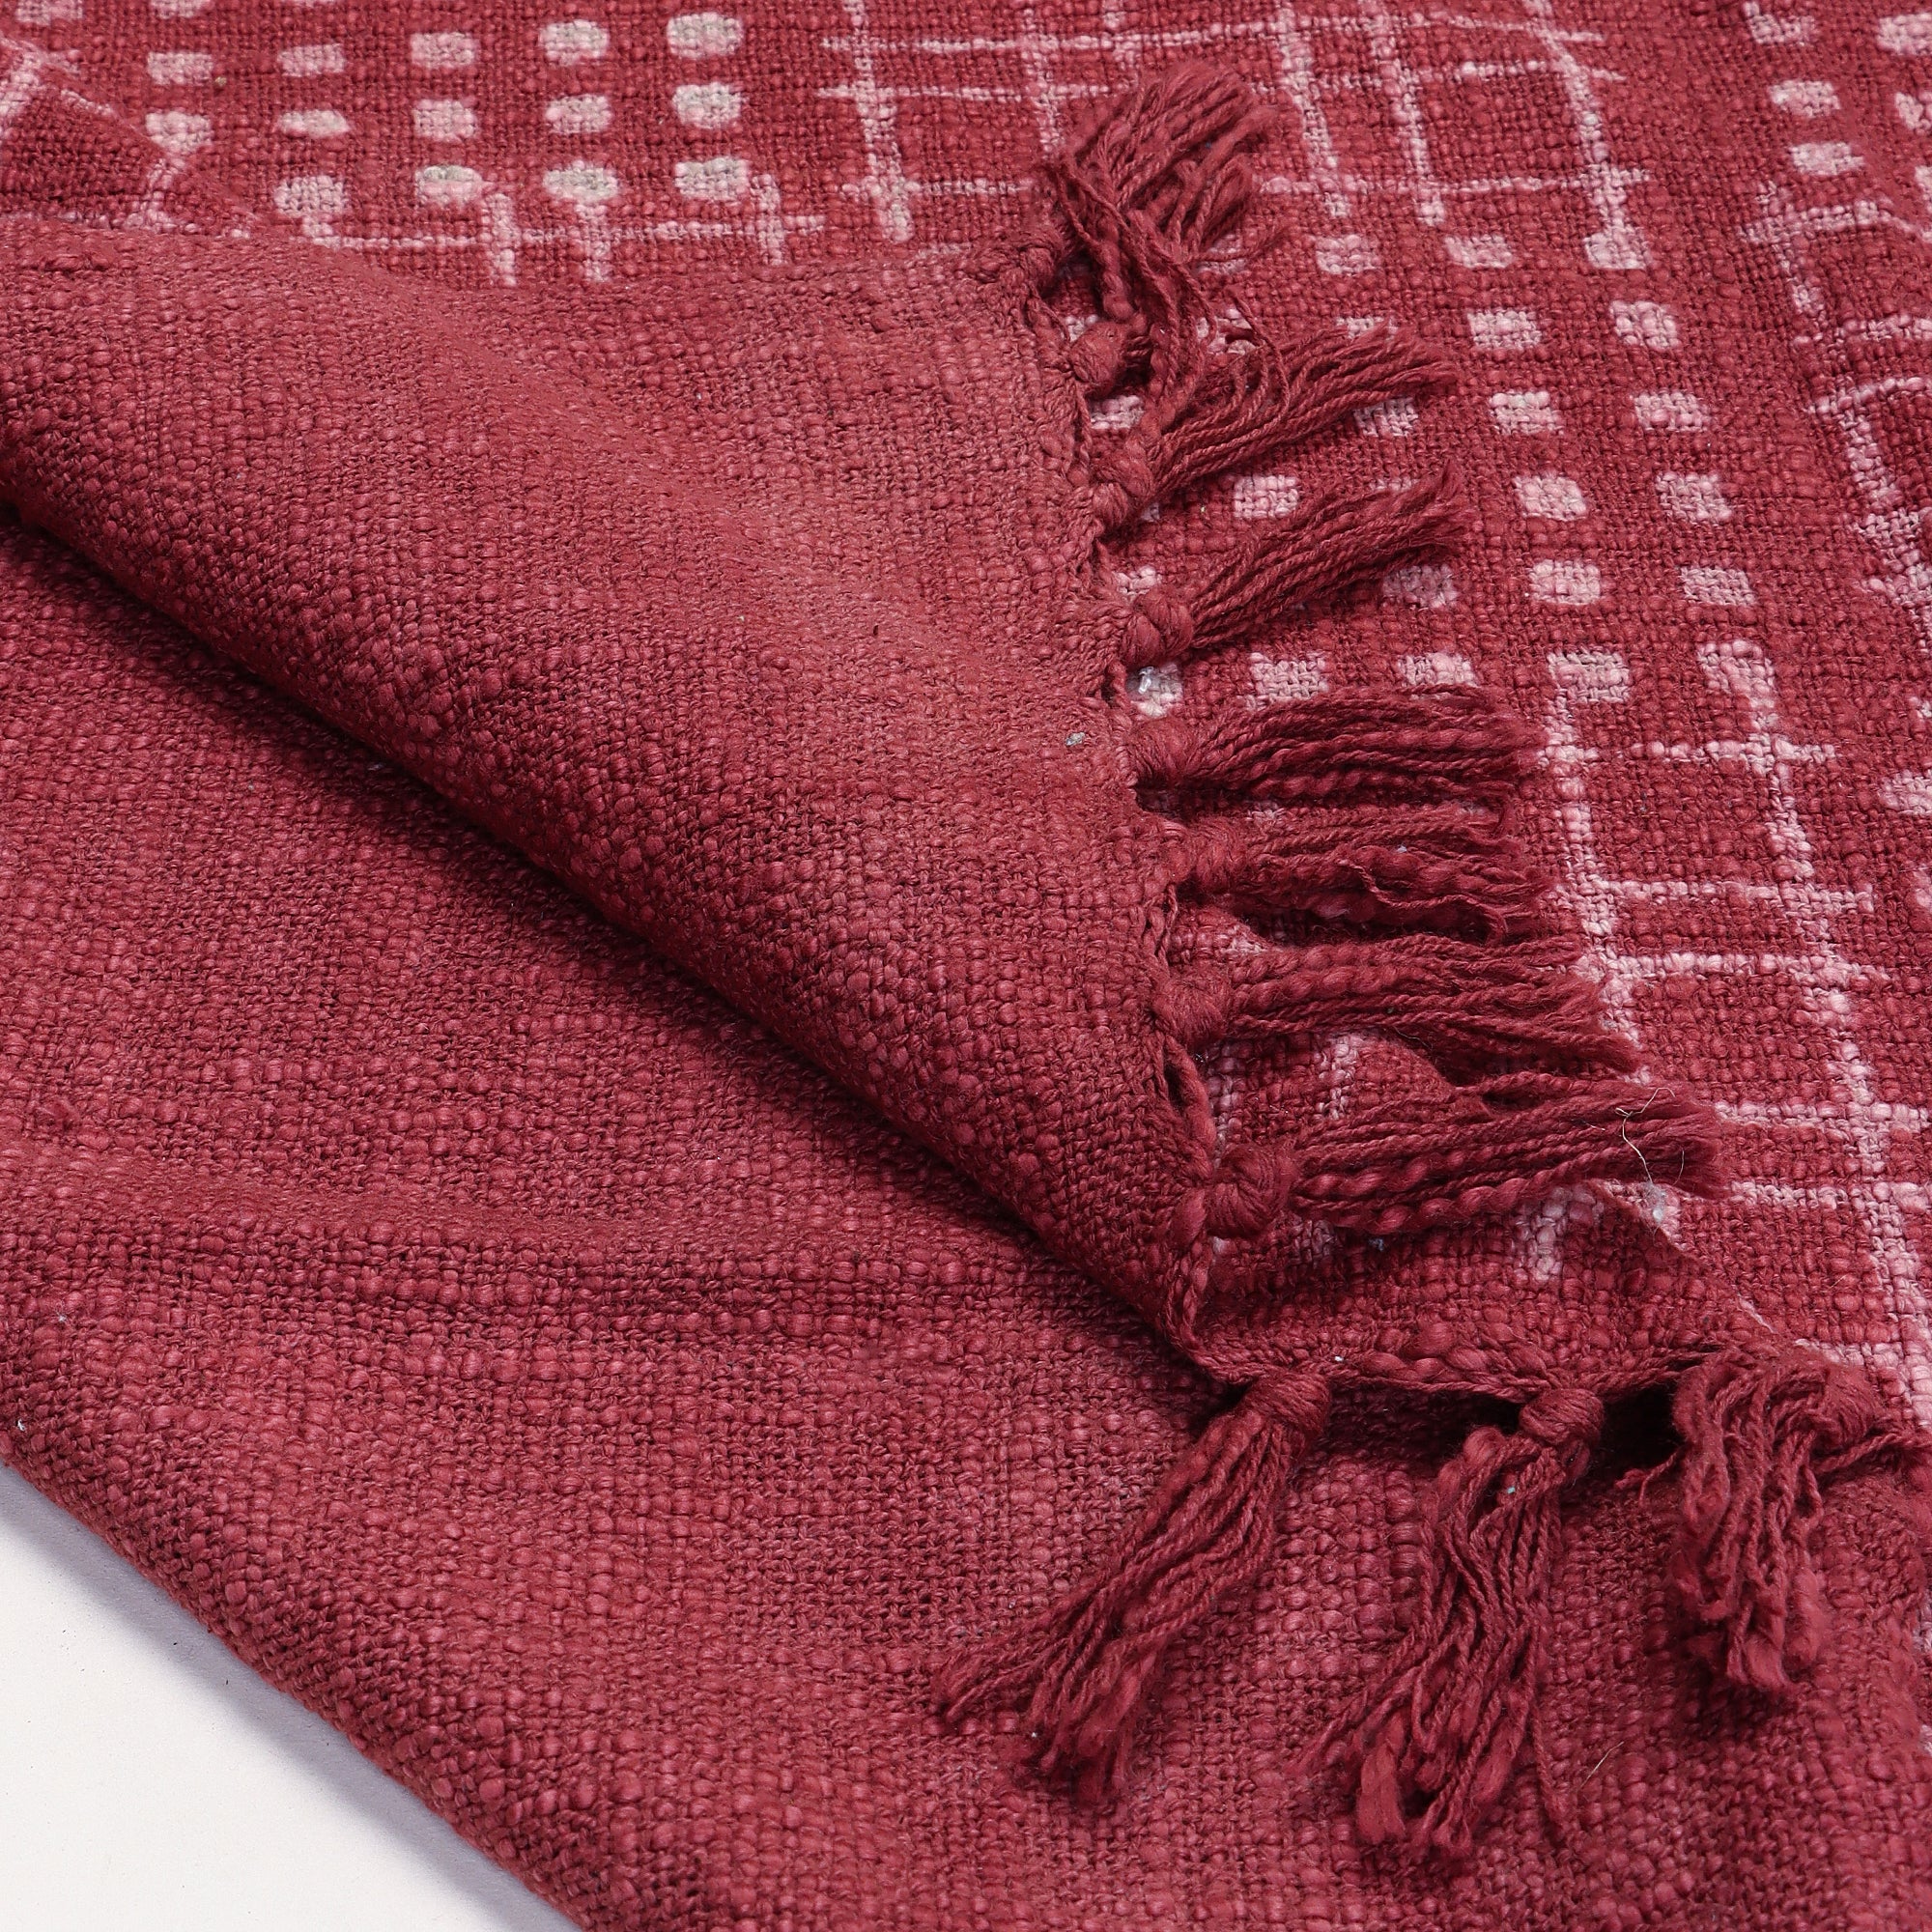 New Maroon Color Soft Cotton Cozy Throws Blankets For Home Decor